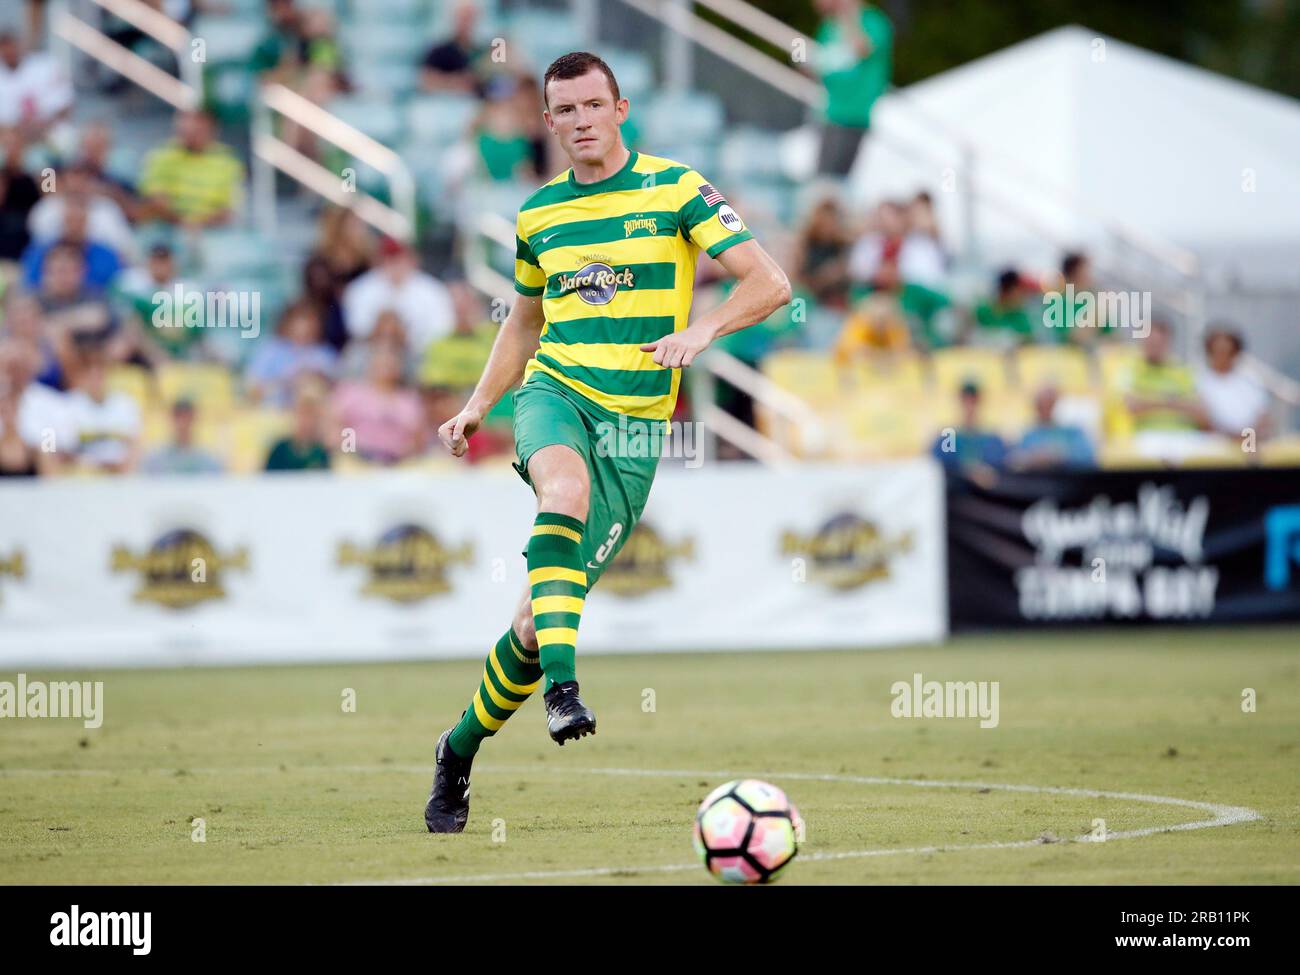 AUGUST 5, 2017 - ST. PETERSBURG, FLORIDA: Defender Neill Collins during the Tampa Bay Rowdies match against the Harrisburg City Islanders at Al Lang Field. Collins was named the Head Coach at Barnsley F.C. on July 6, 2023. Stock Photo